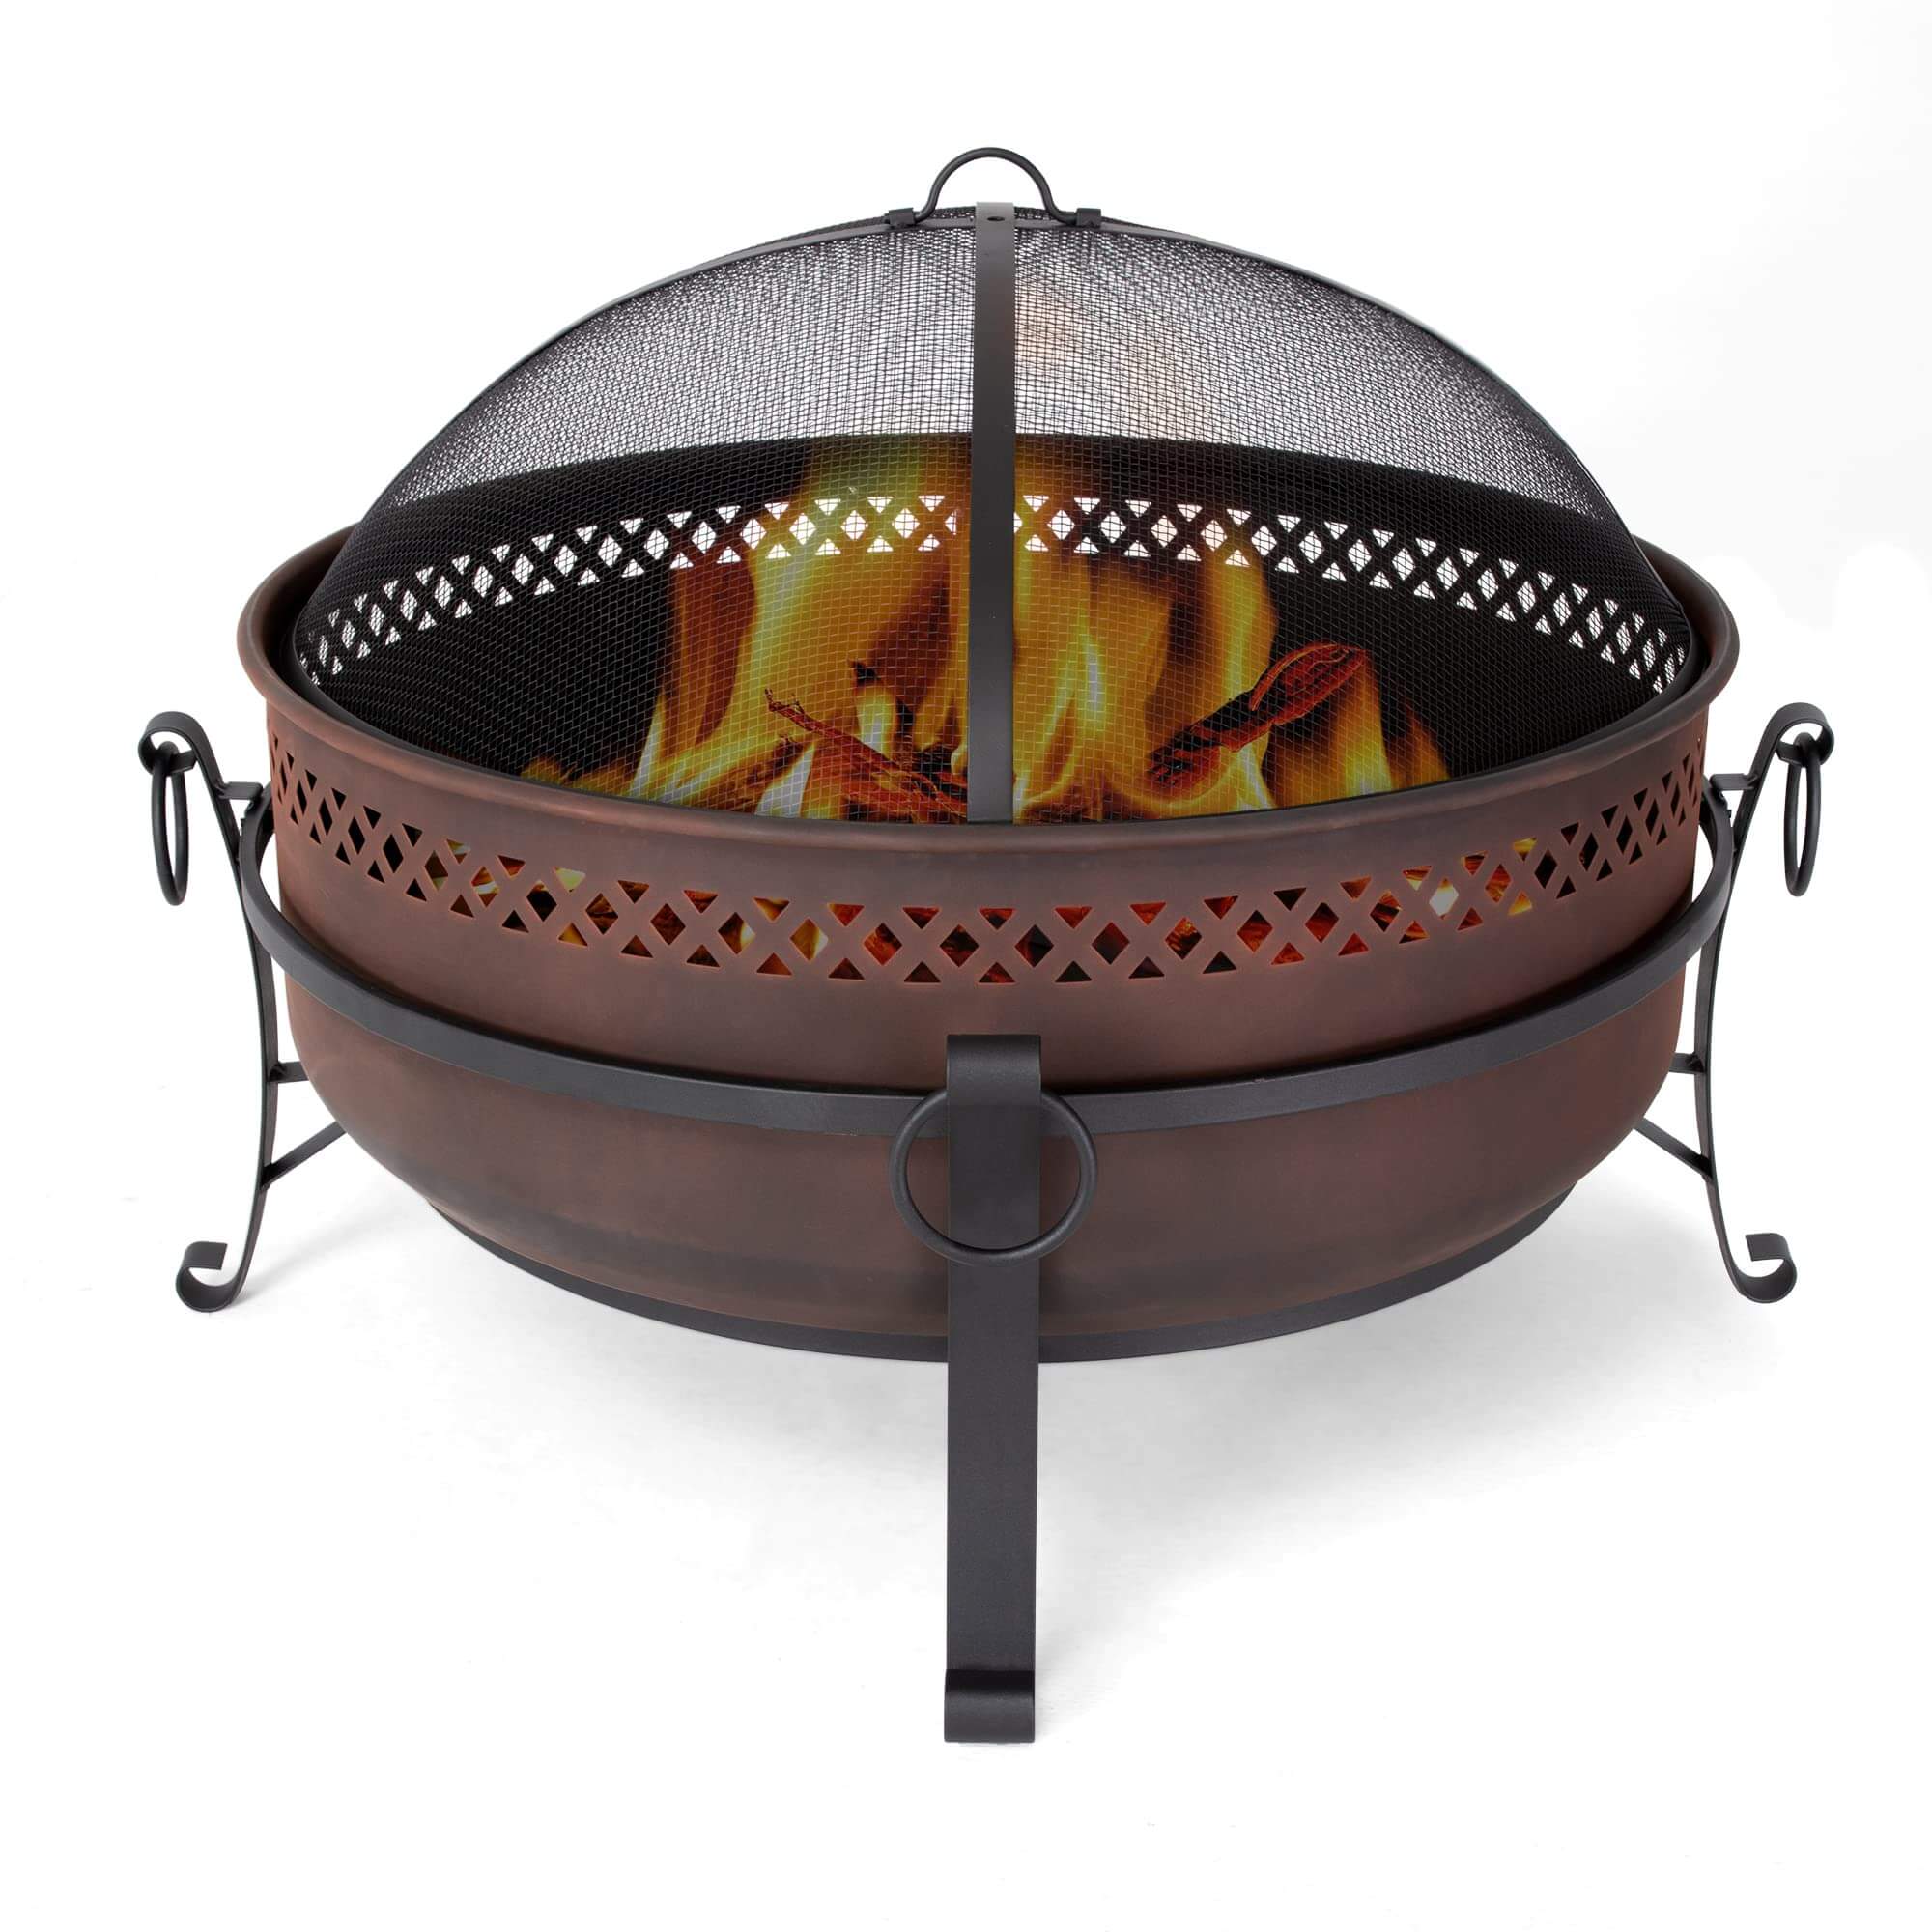 Outdoor-Bonfire-Wood-Burning-Fire-Pit-with-Grill-and-Fireplace-Poker#size_40-inch